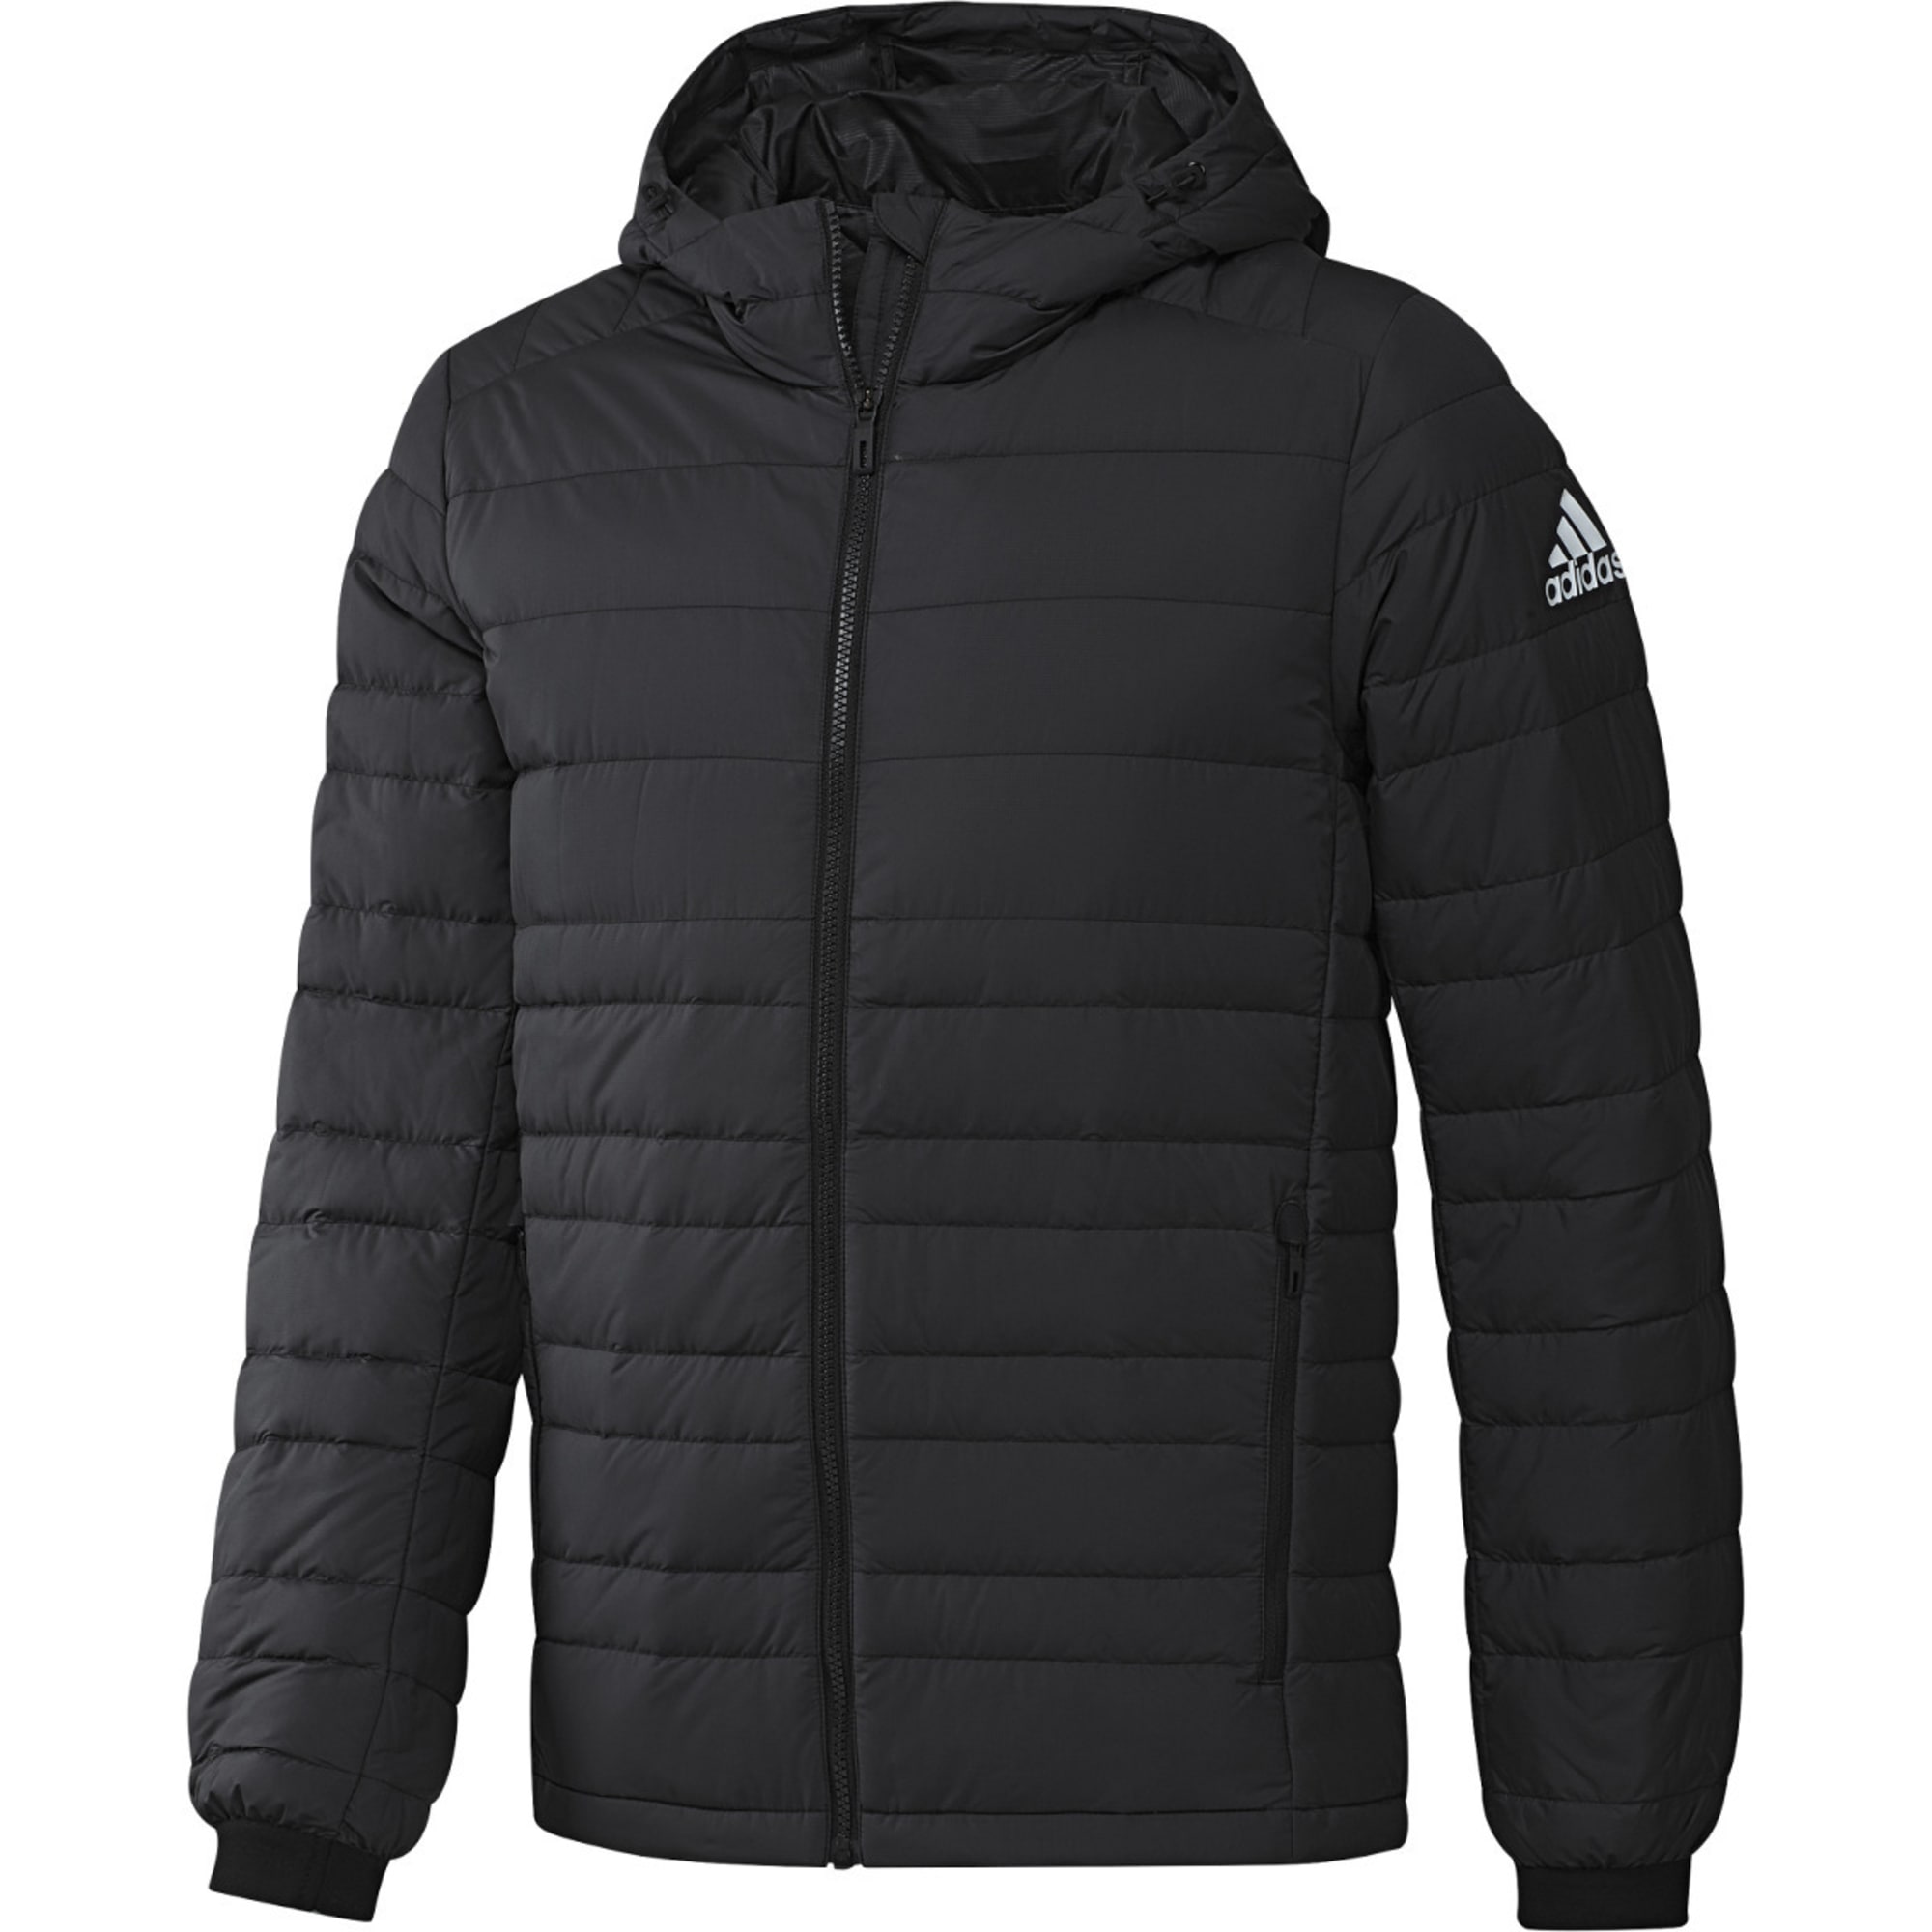 bezoeker Lyrisch dialect ADIDAS Men's Climawarm Nuvic Hooded Down Jacket - Eastern Mountain Sports